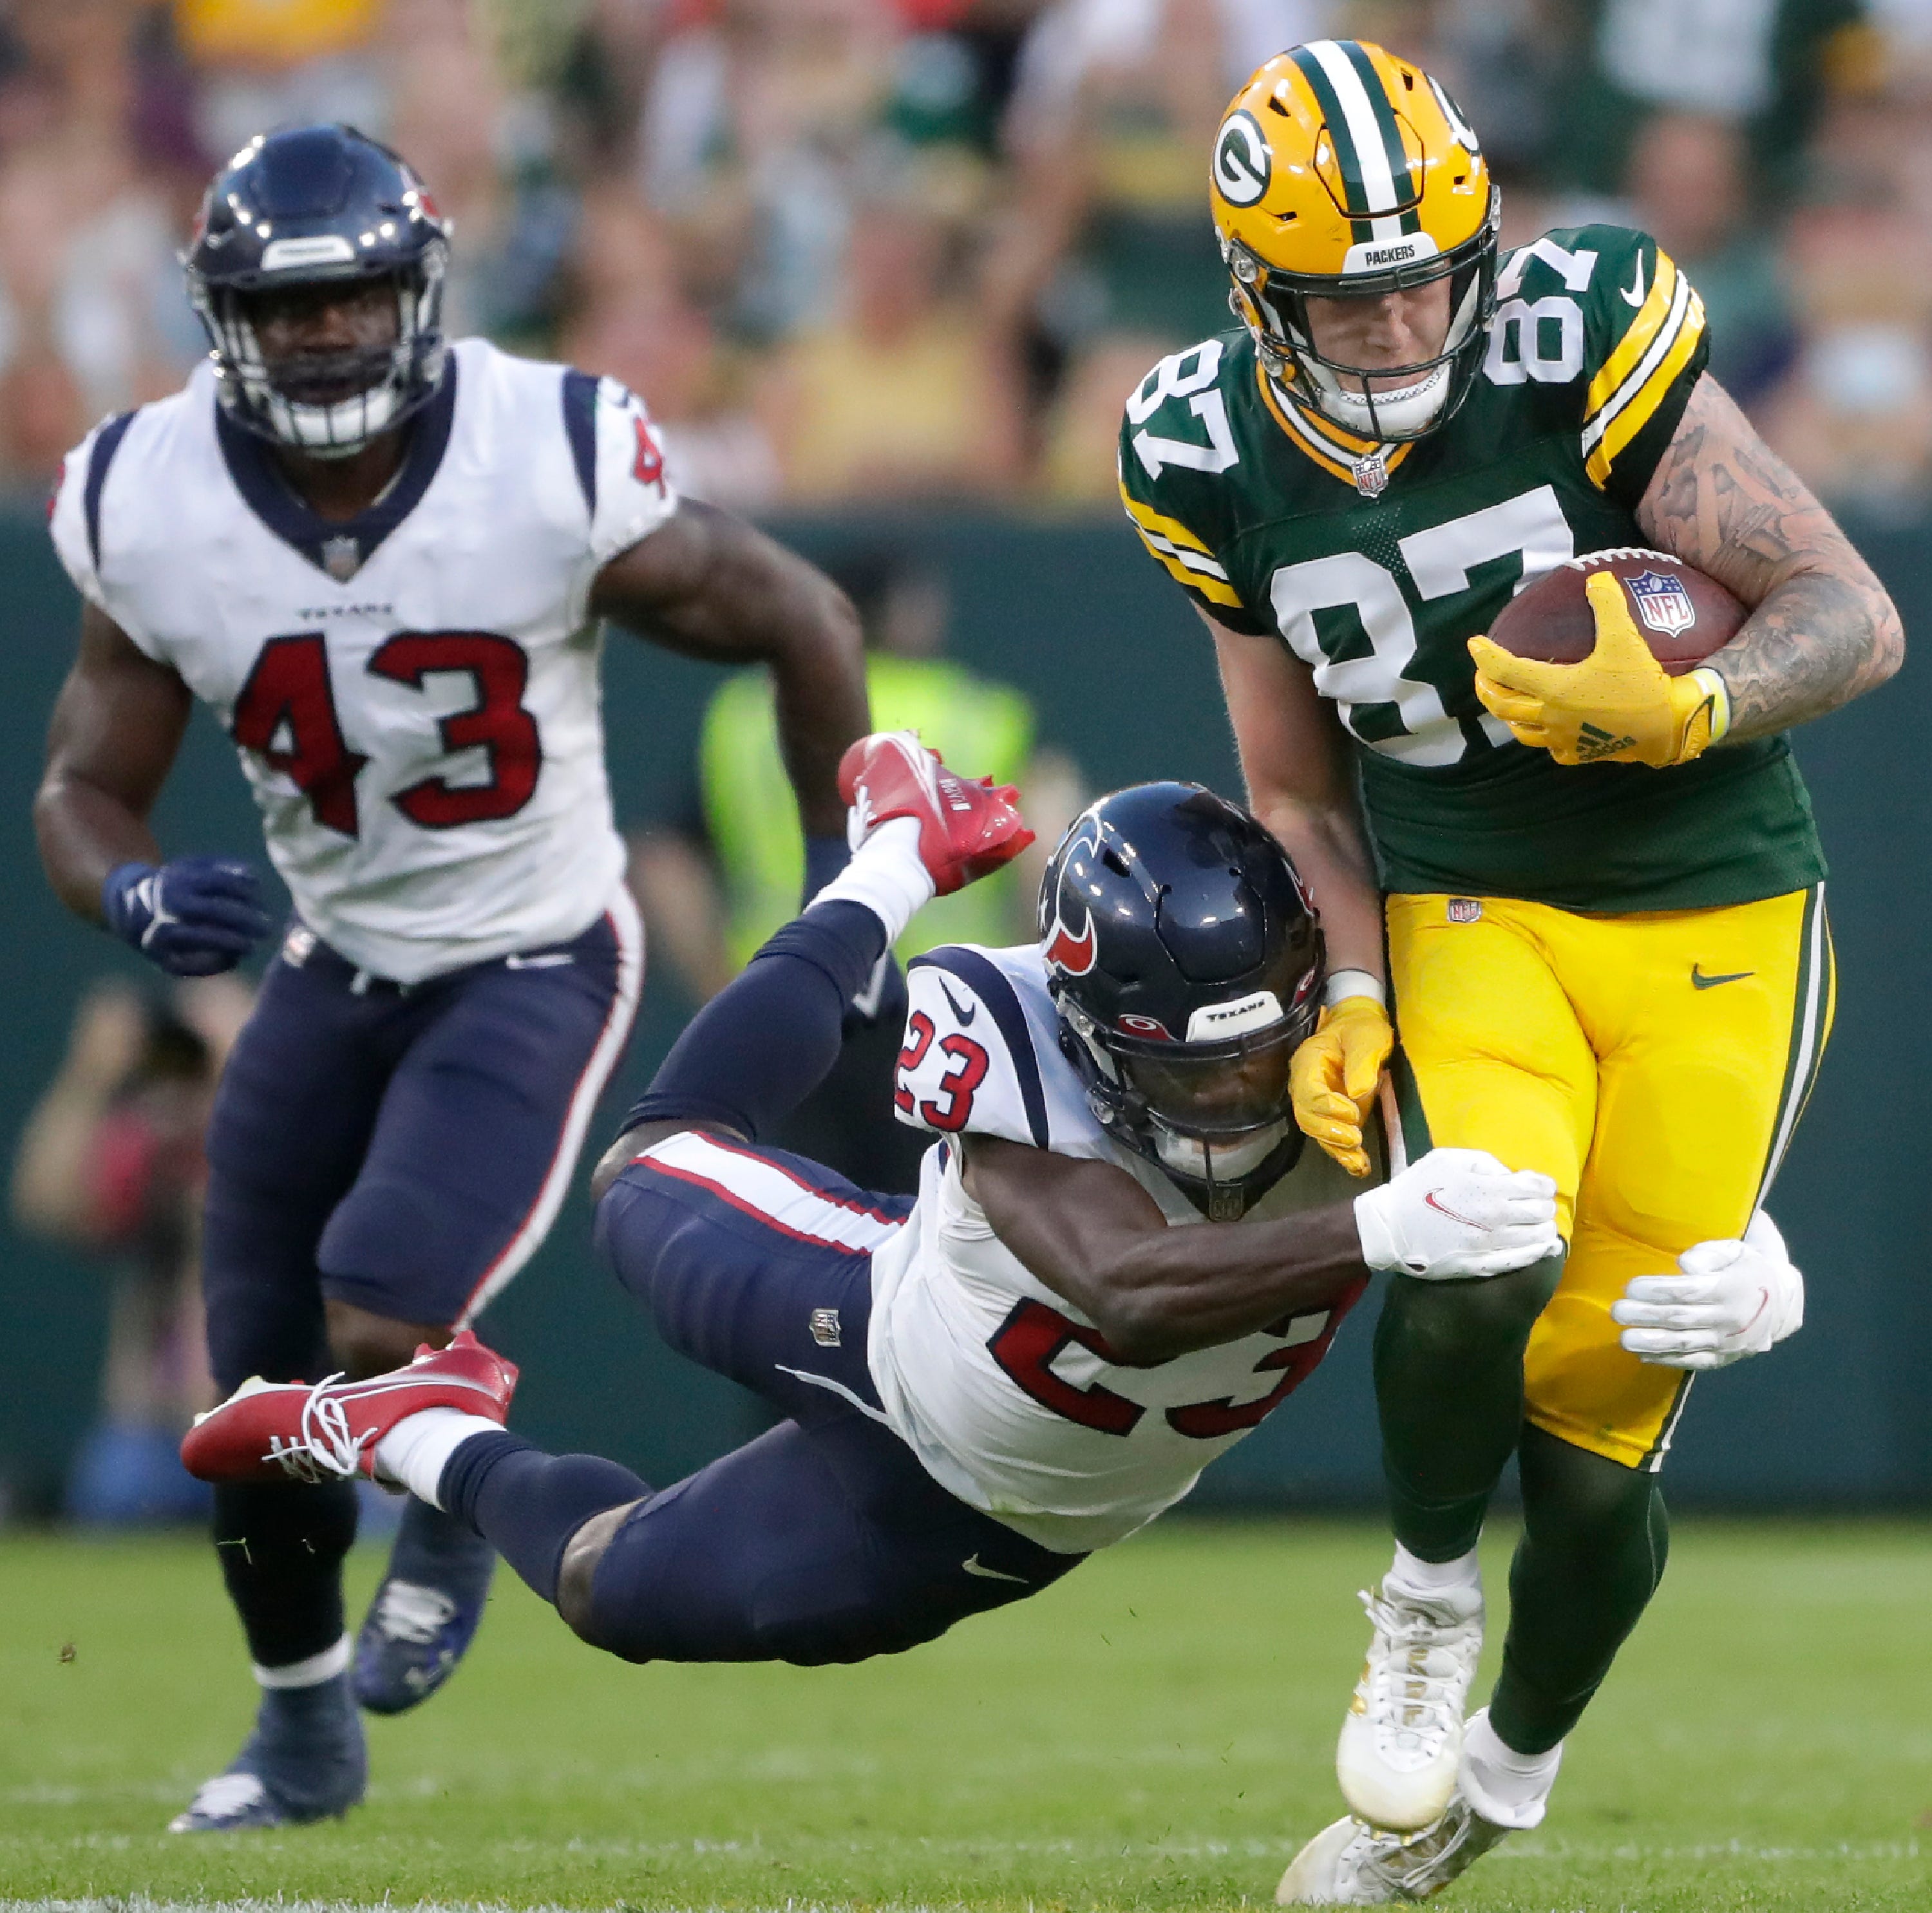 Green Bay Packers tight end Jace Sternberger (87) catches a pass and is tackled by Houston Texans safety Eric Murray (23) during their preseason football game at Lambeau Field in Green Bay.